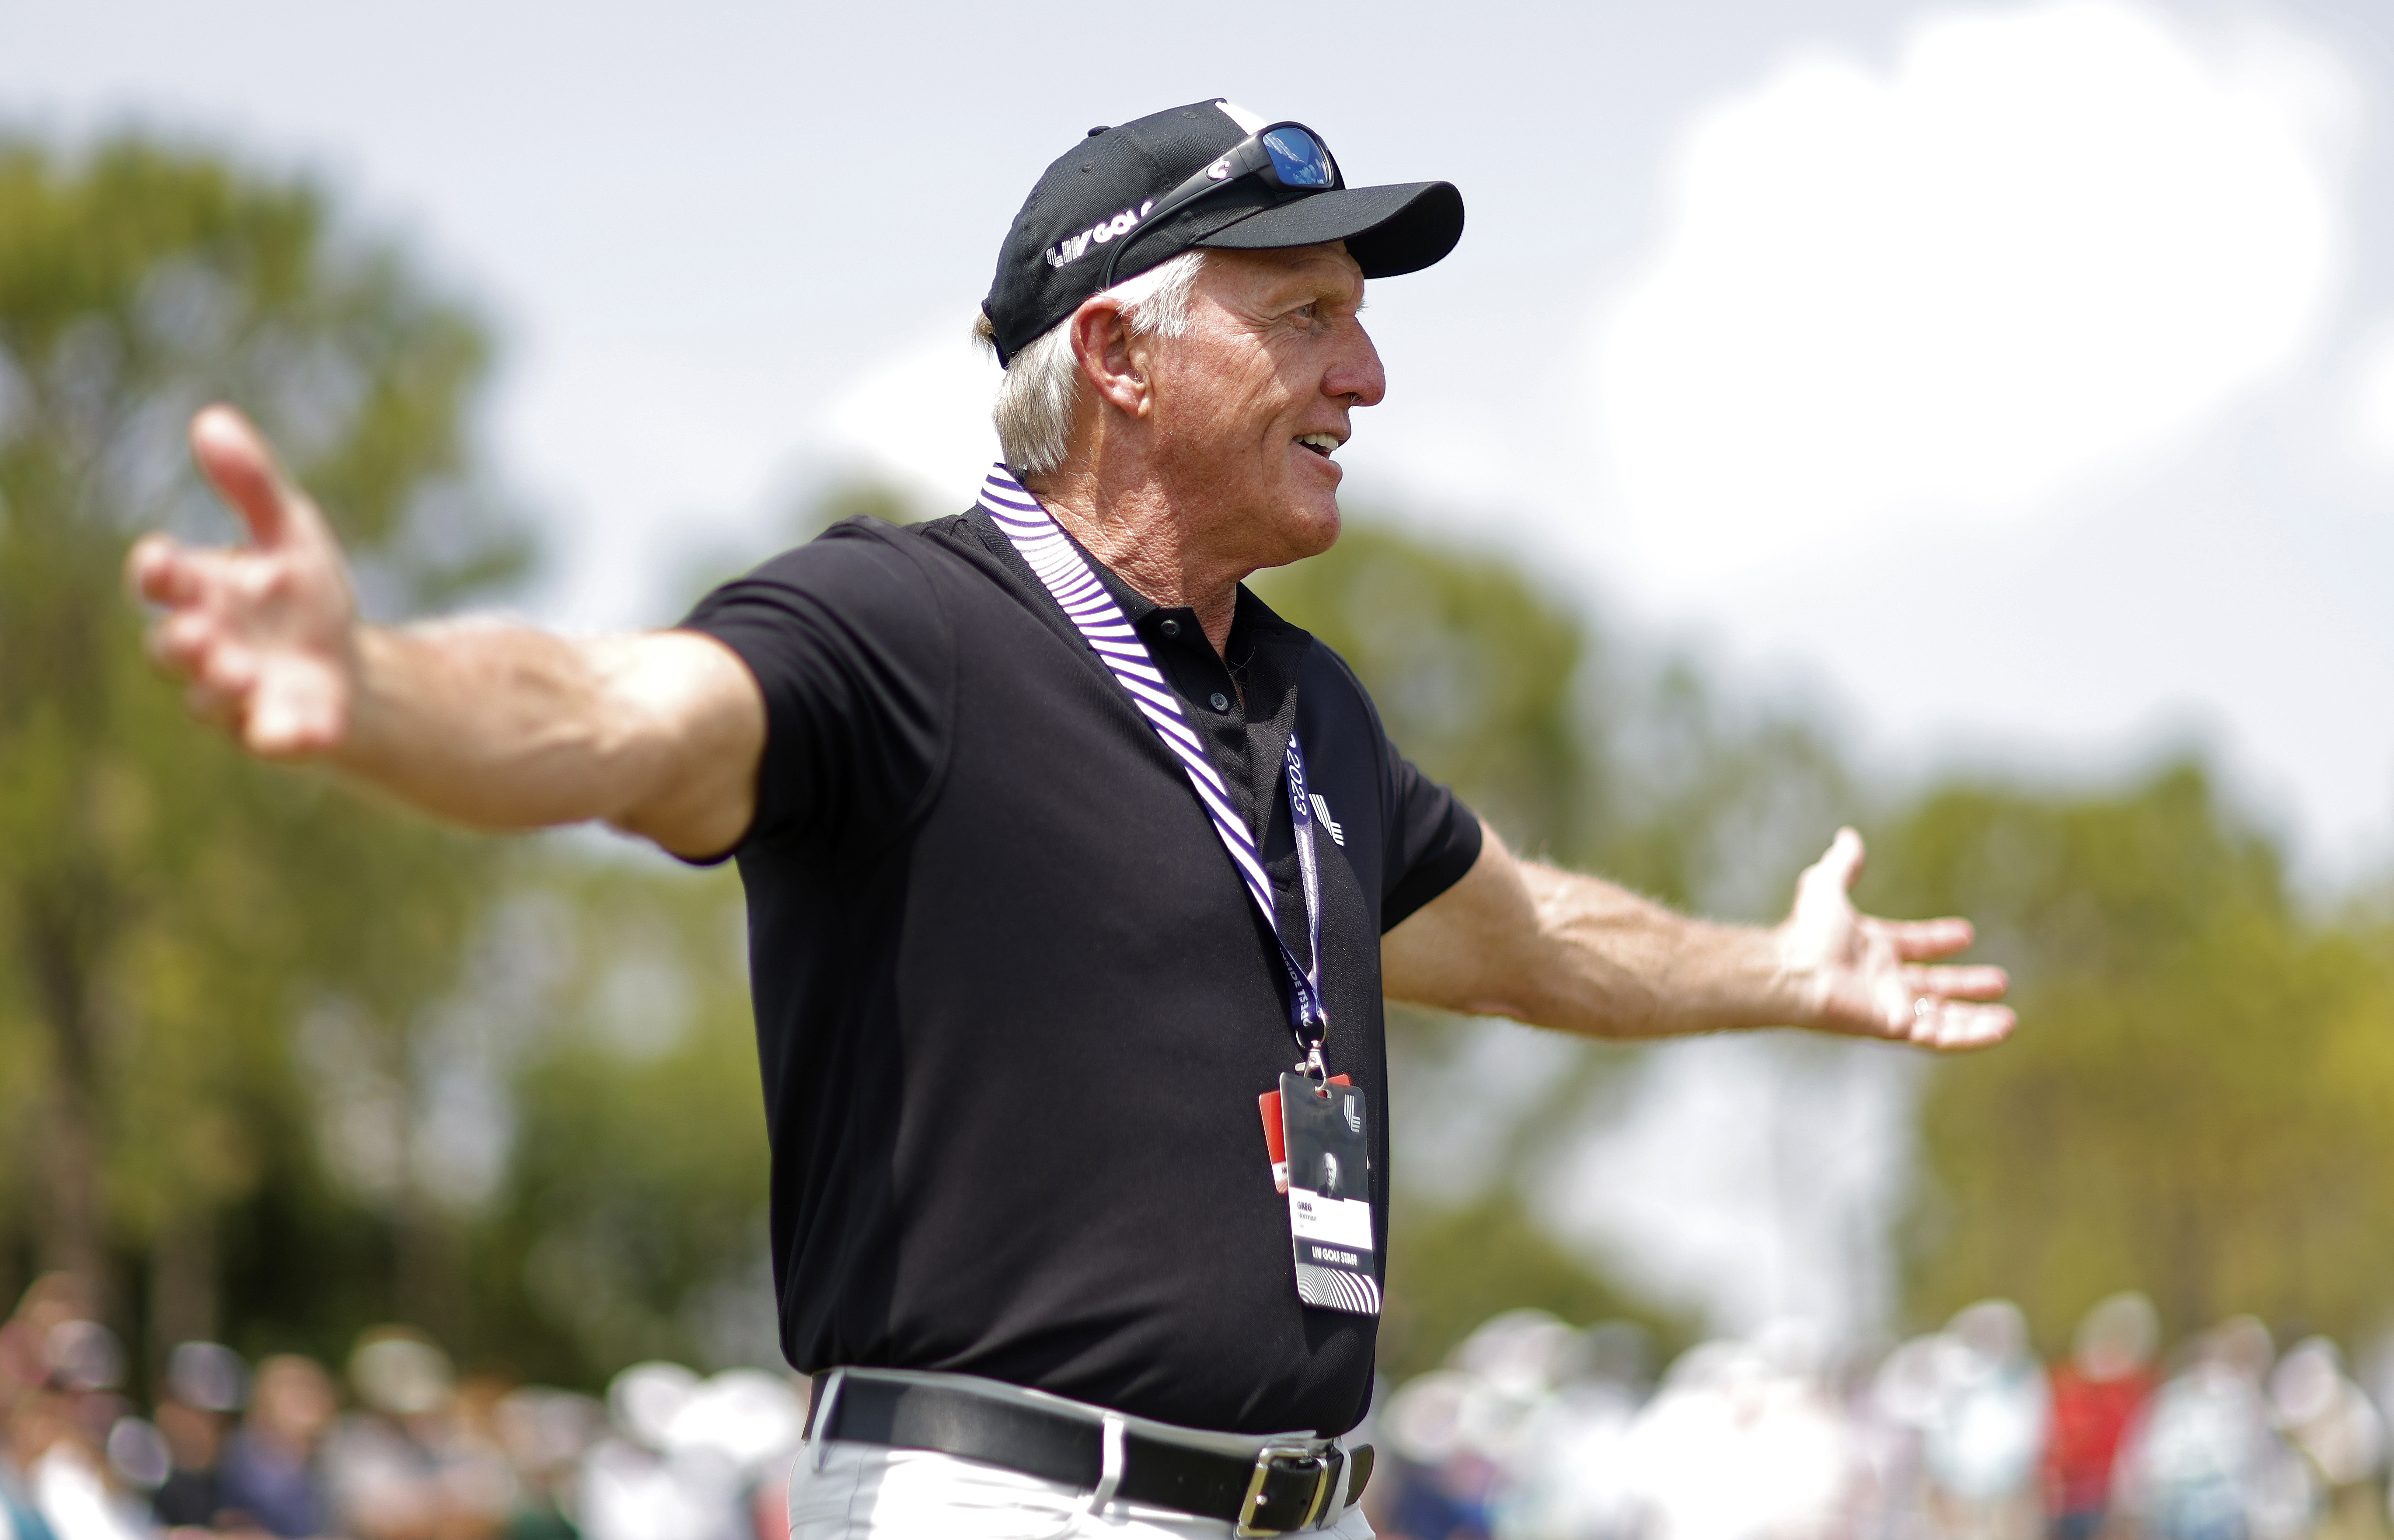 Greg Norman is the CEO and driving force behind LIV Golf